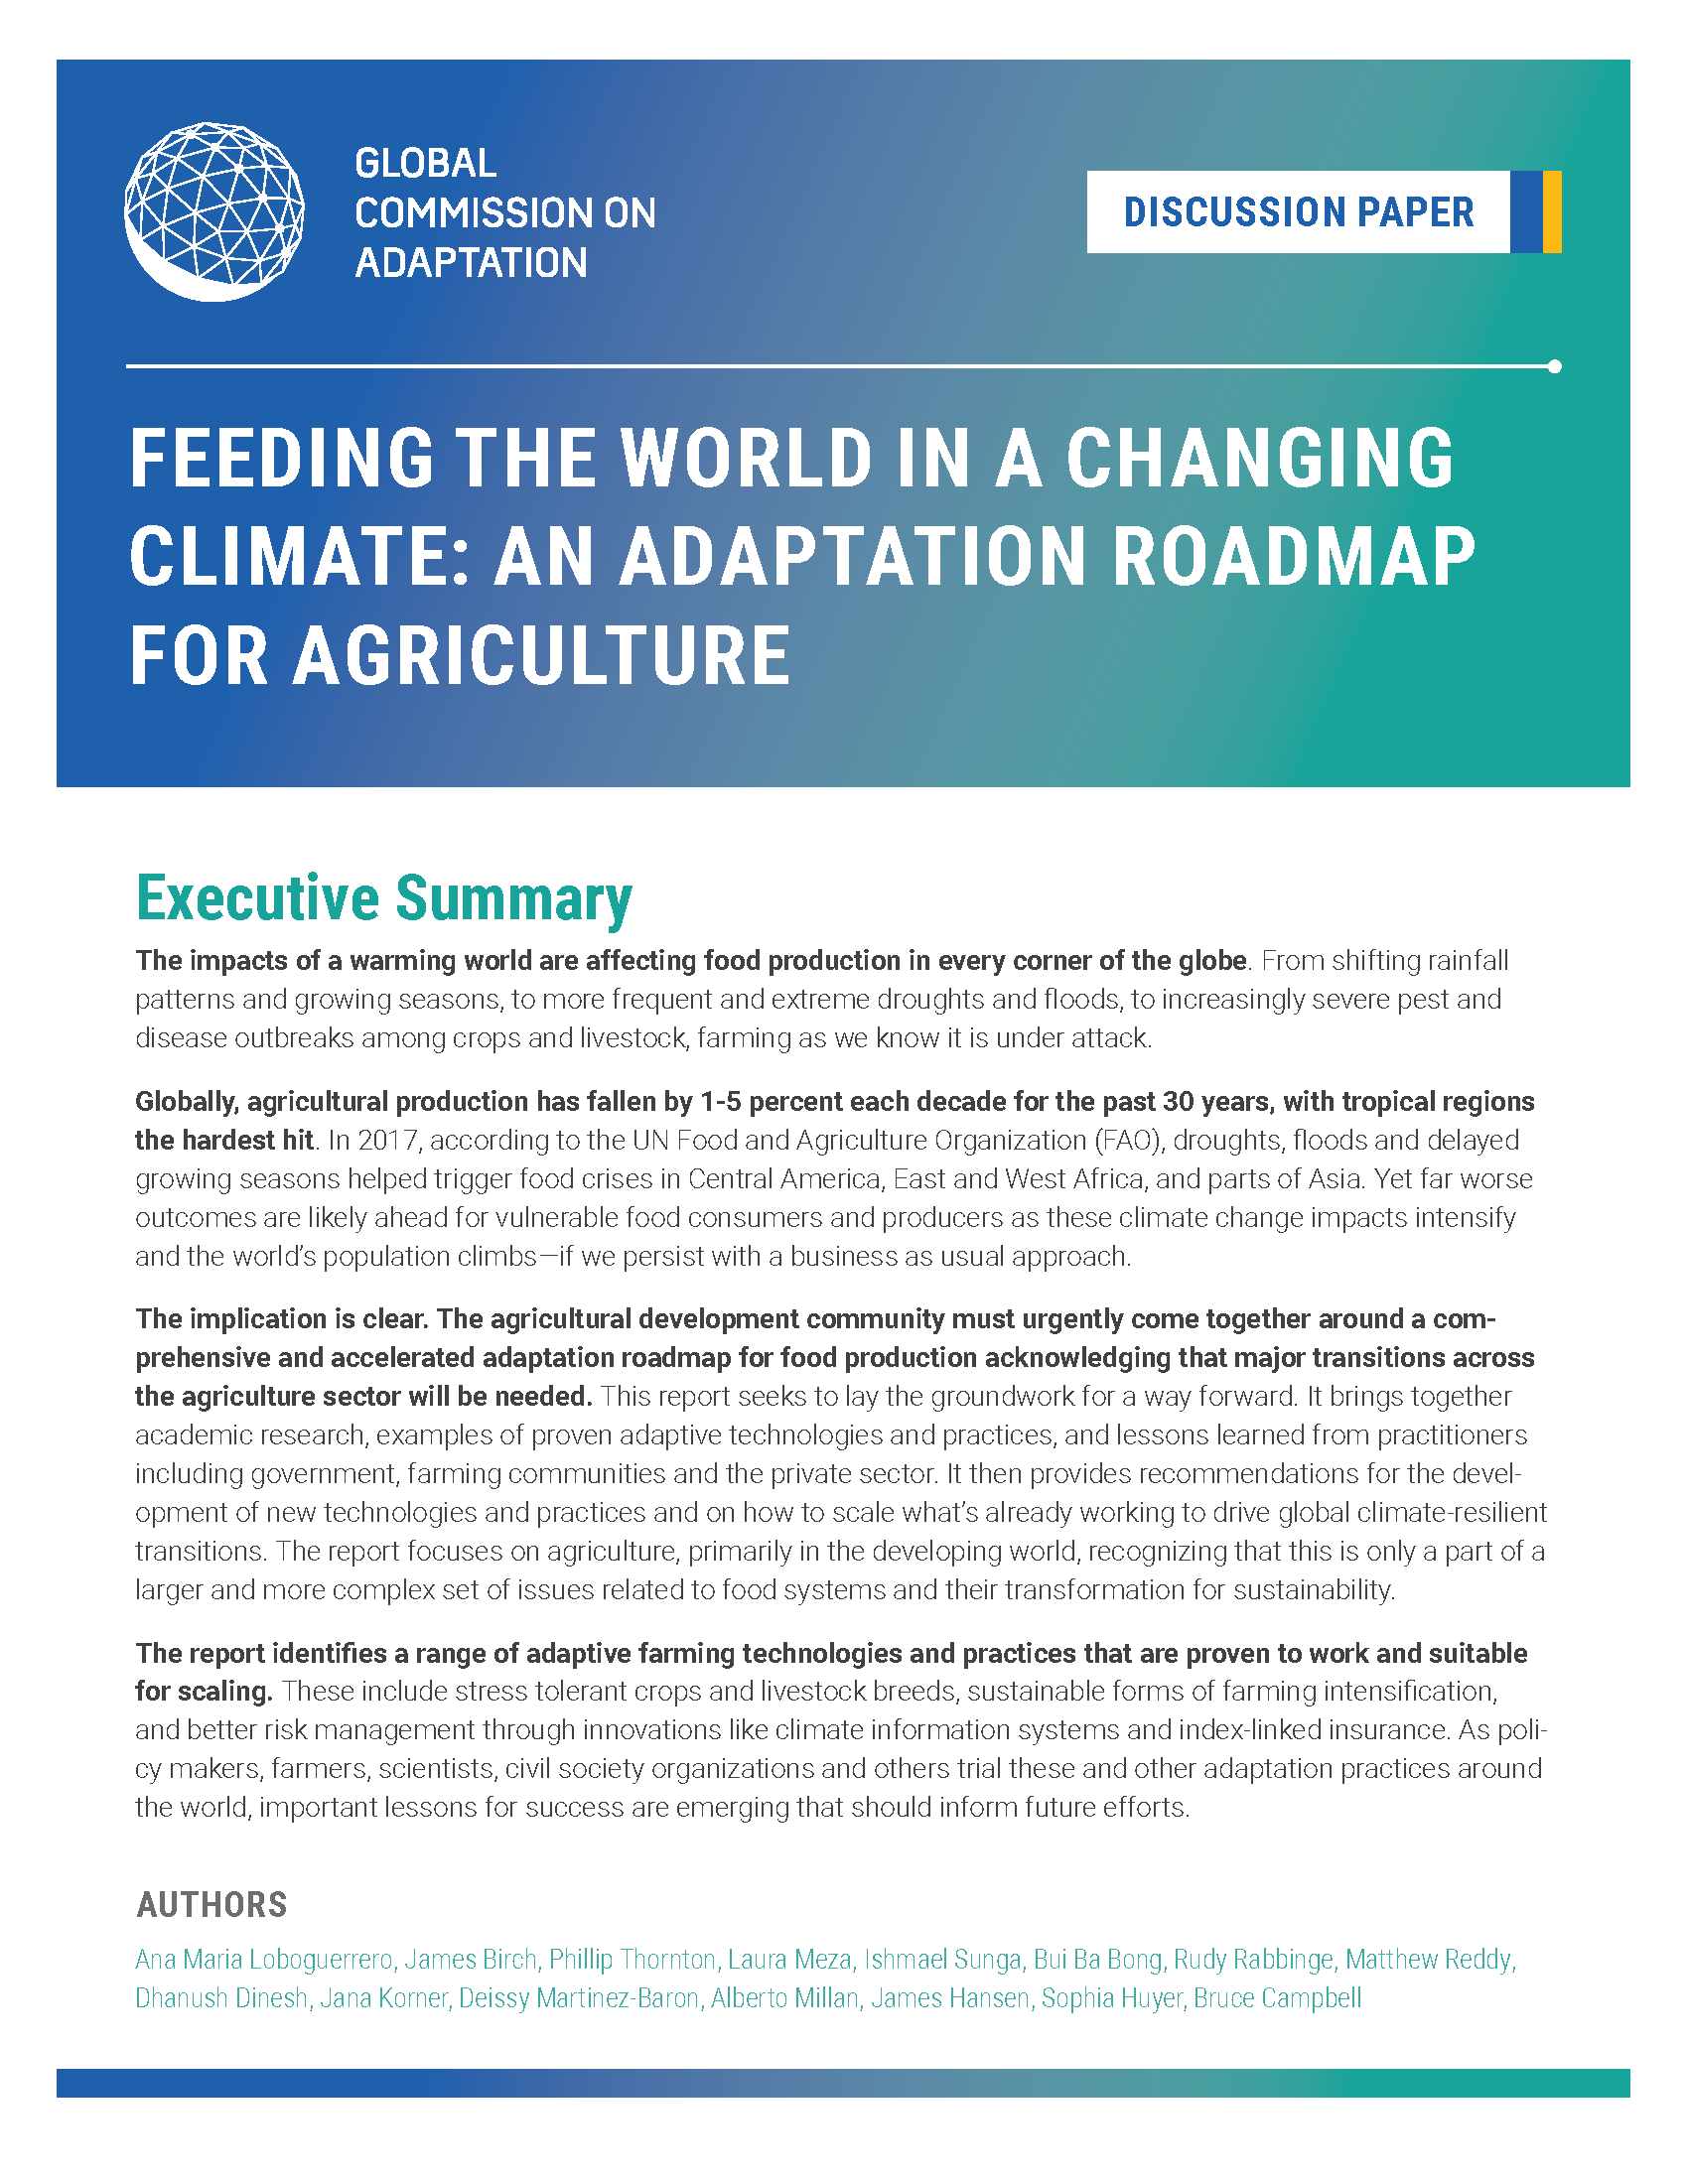 Cover page for Feeding the World in a Changing Climate: An Adaptation Roadmap for Agriculture